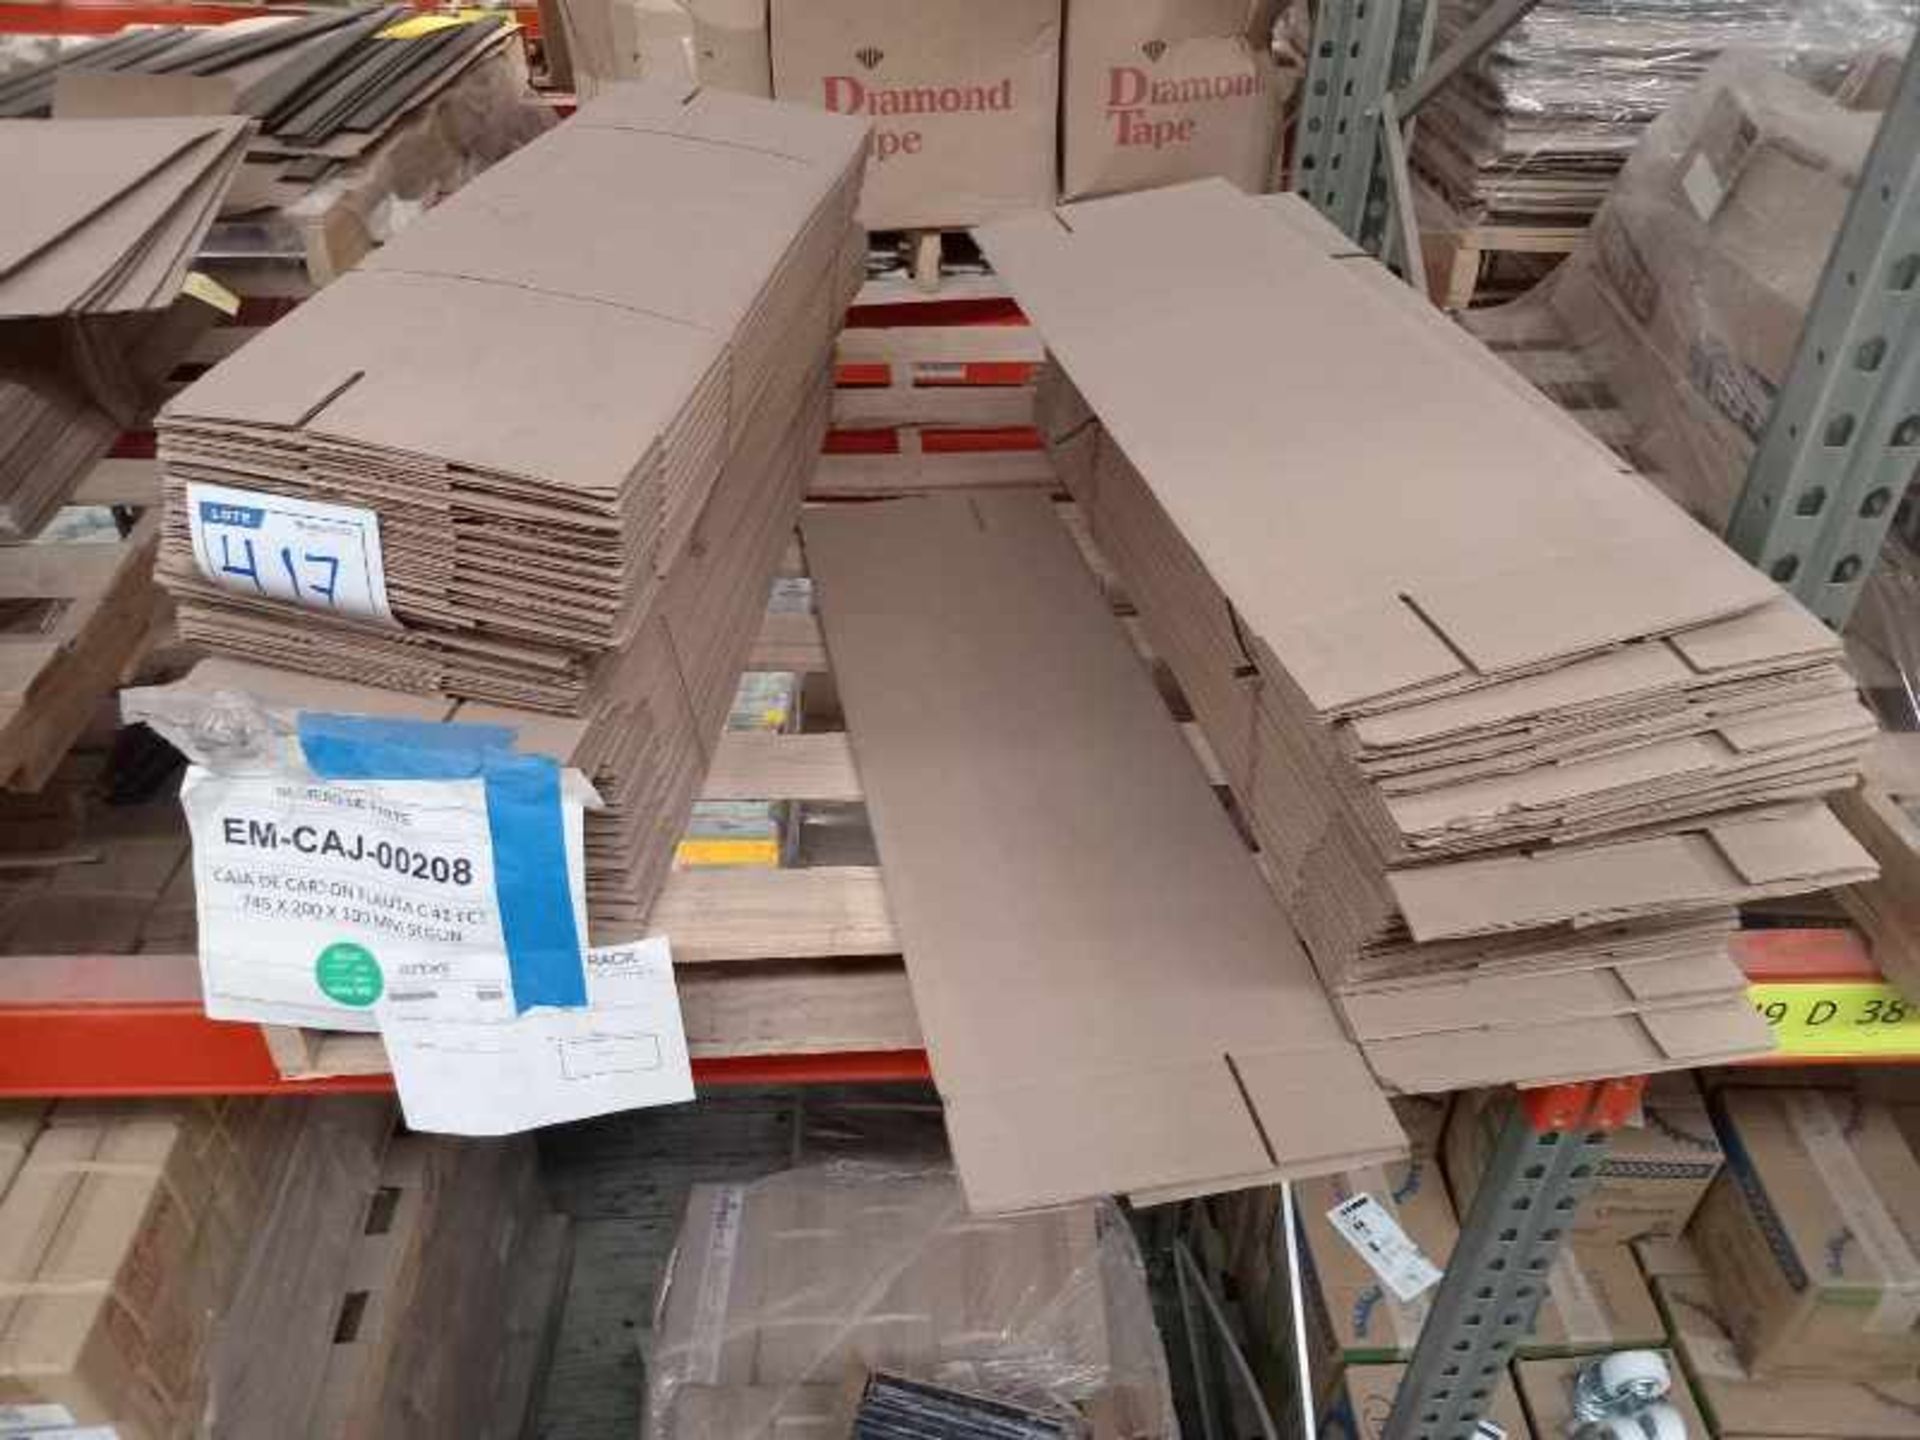 LOT OF APPROXIMATELY (83,310) PCS OF CARDBOARD BOXES AND ACCESSORIES - Image 32 of 119